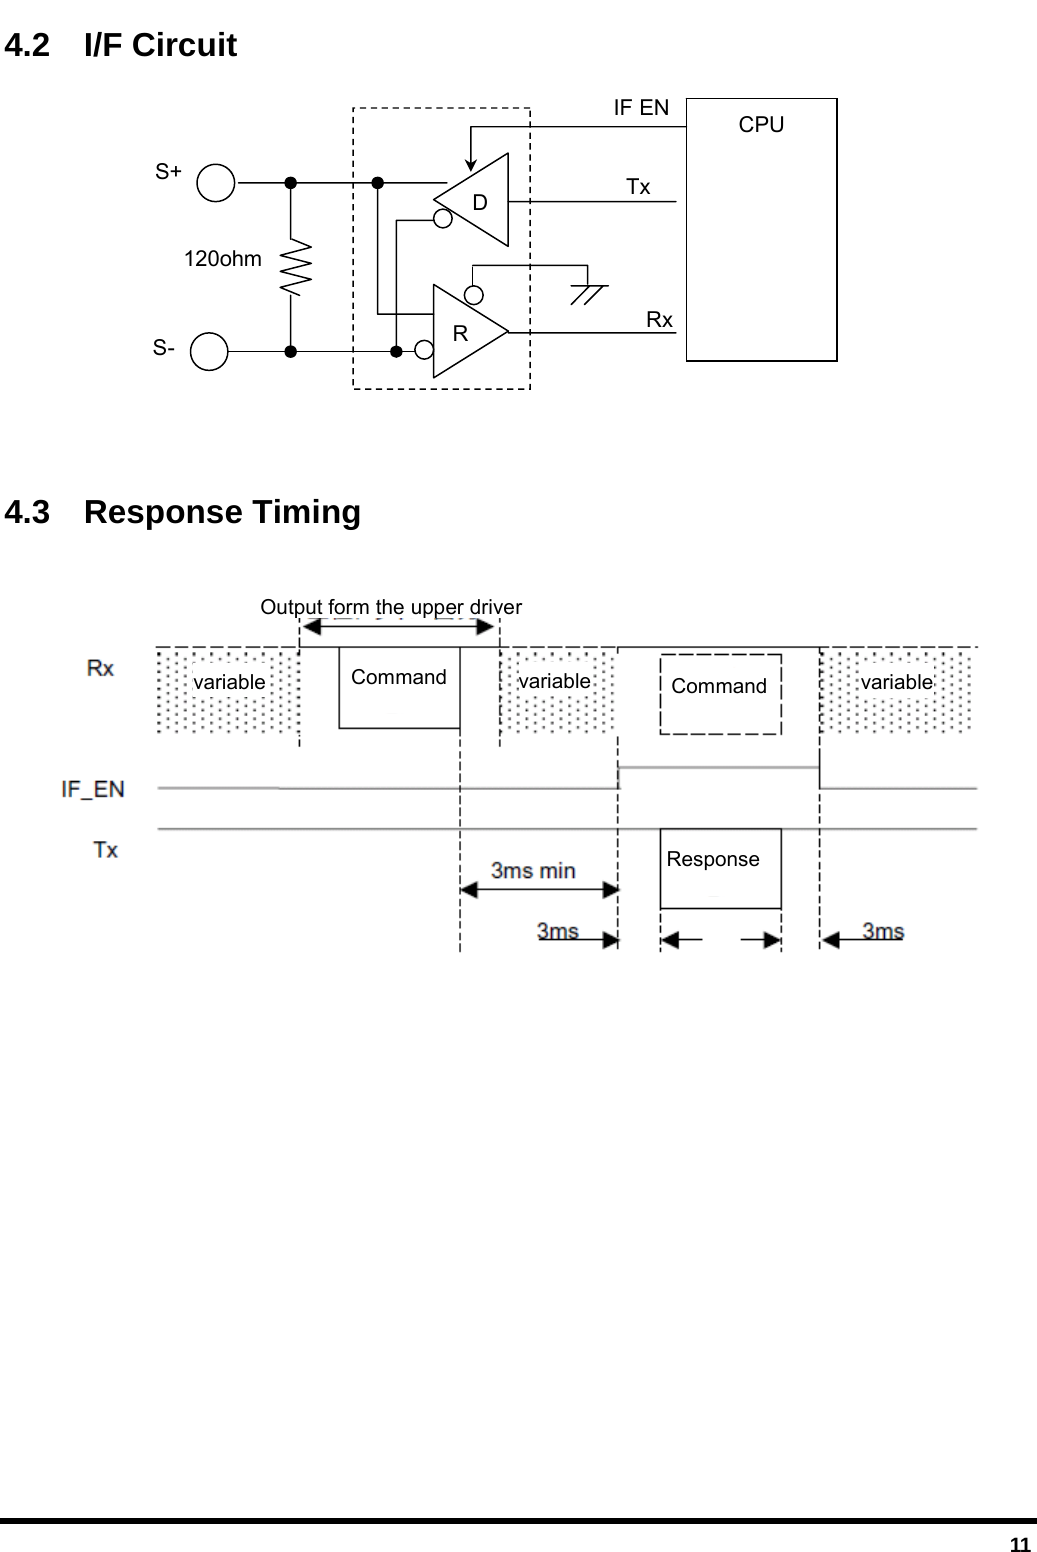  11 4.2  I/F Circuit                 4.3 Response Timing   variable  variable  variable Command  Command Response Output form the upper driver S+ S- D R CPU Rx 120ohm IF EN Tx 